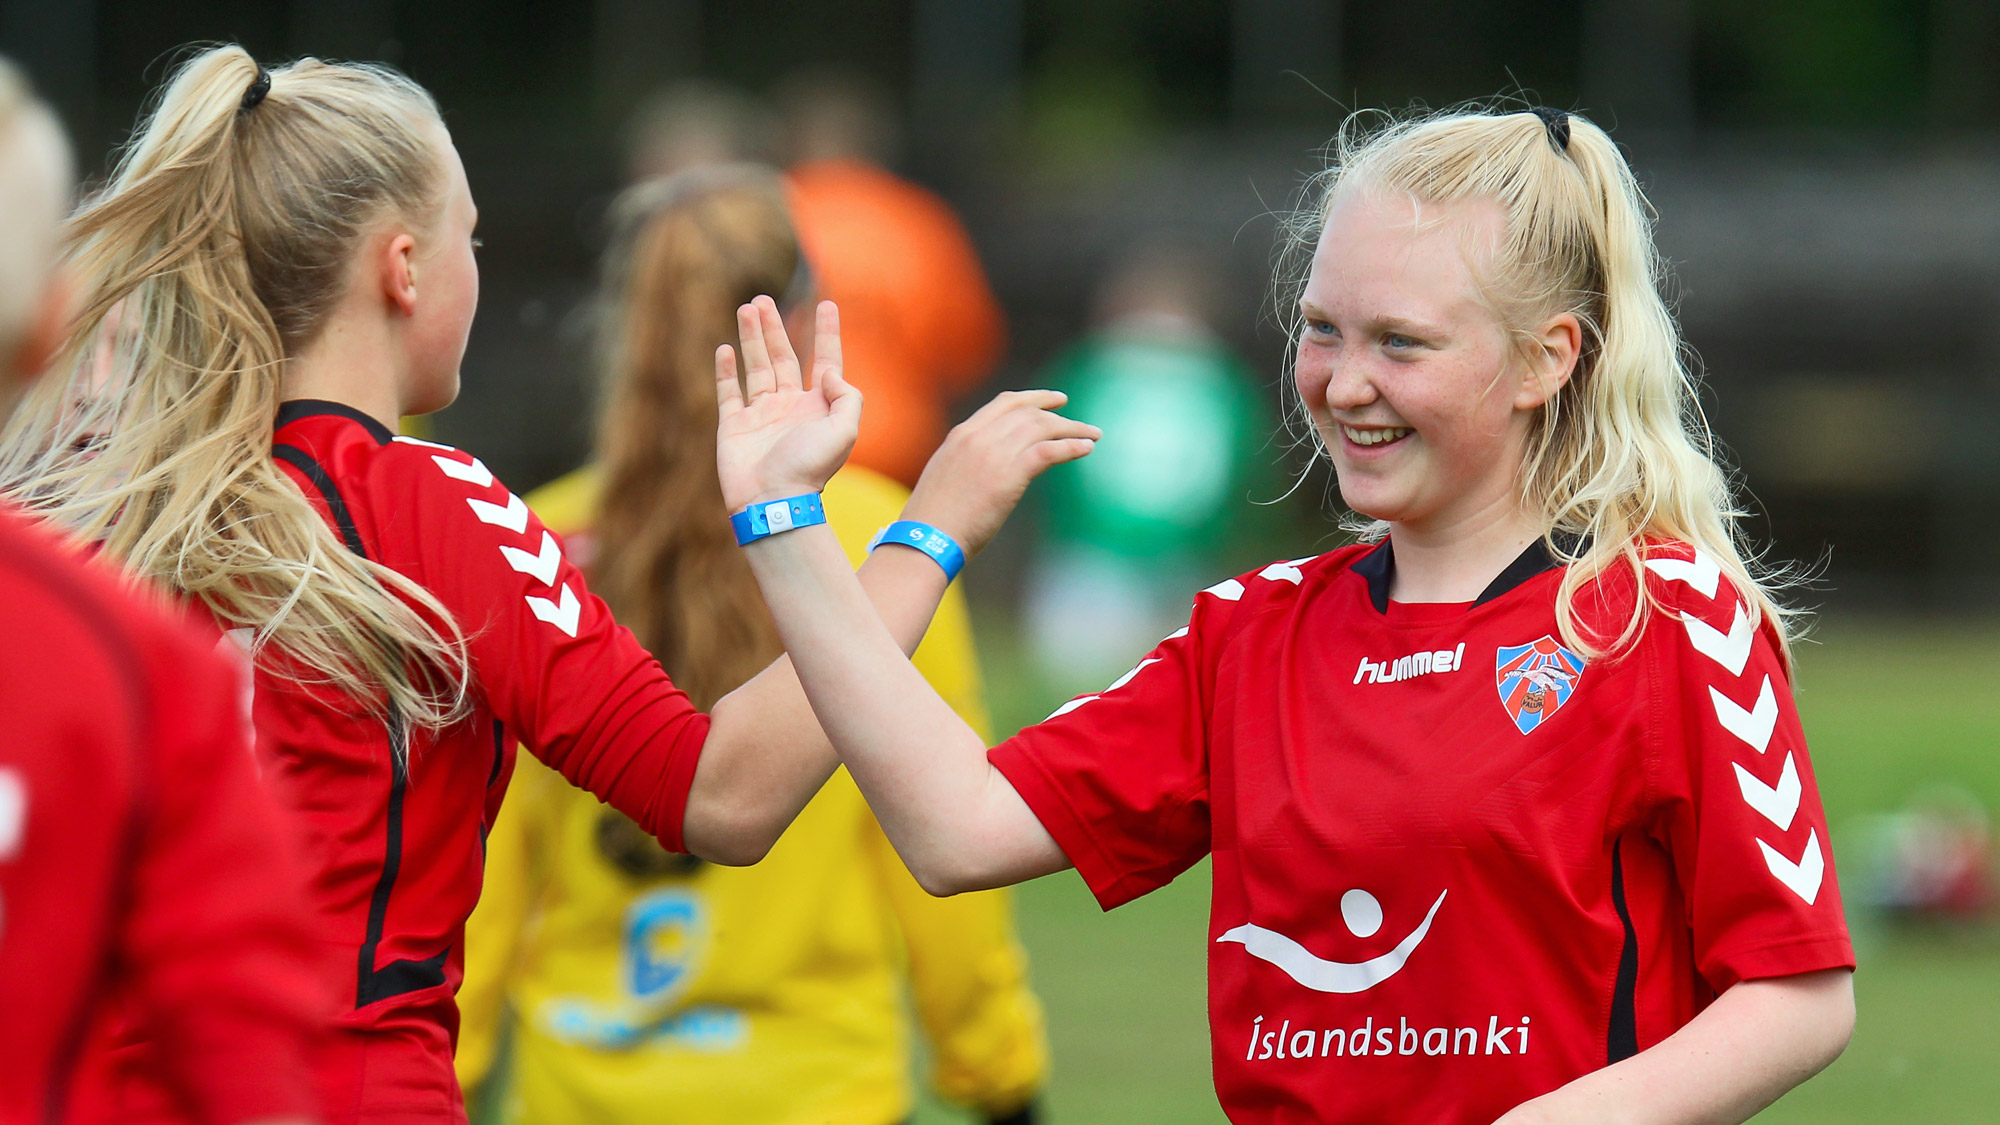 Girl footballers high-five each other.